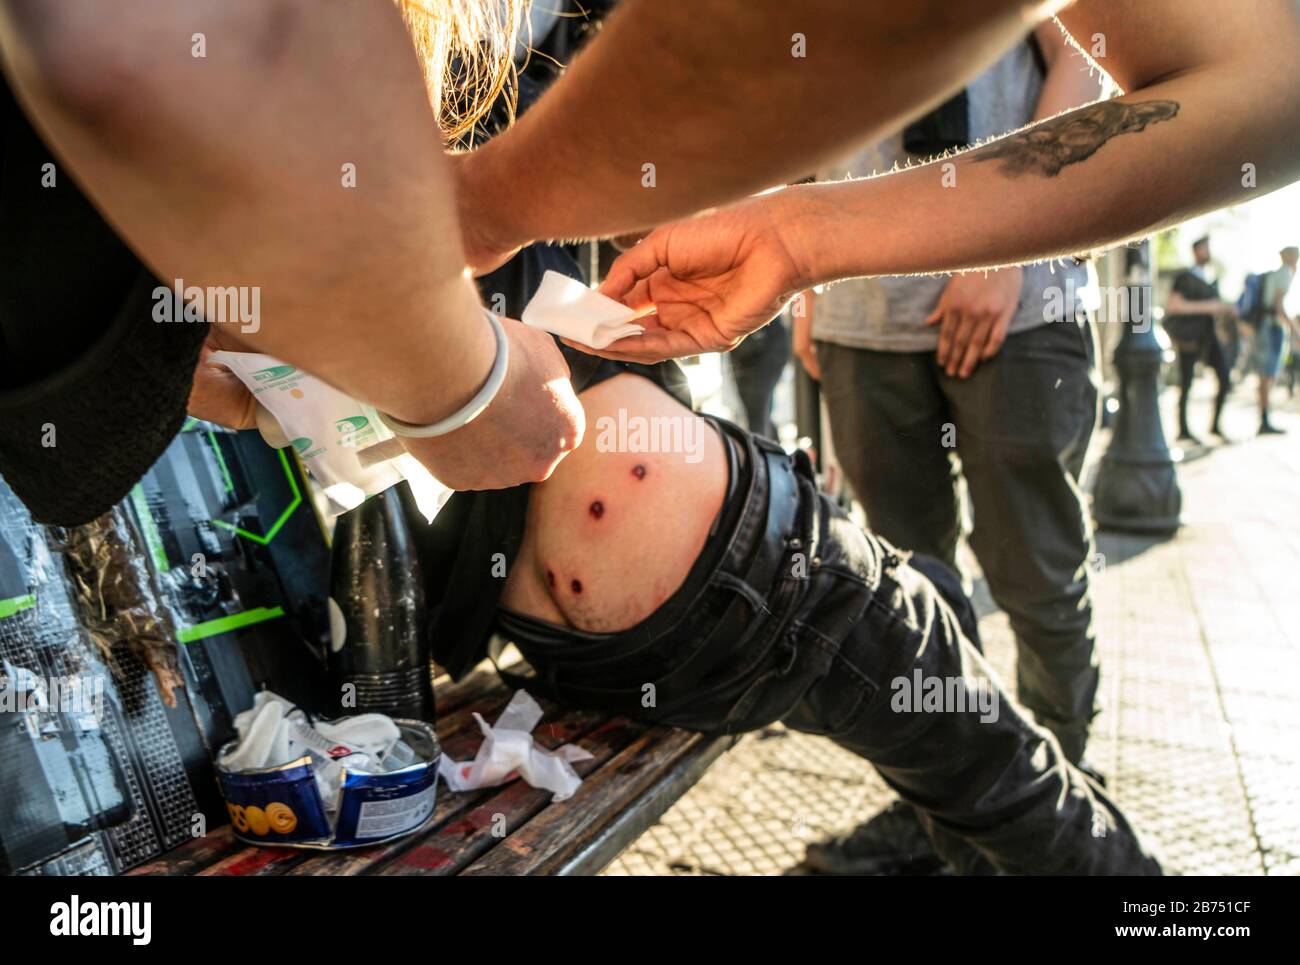 Chile, Santiago, 24.10.2019. Santiago in state of emergency on 24.10.2019. Demonstration at Plaza Baquedano in Santiago. Demonstrators injured by rubber bullets. [automated translation] Stock Photo